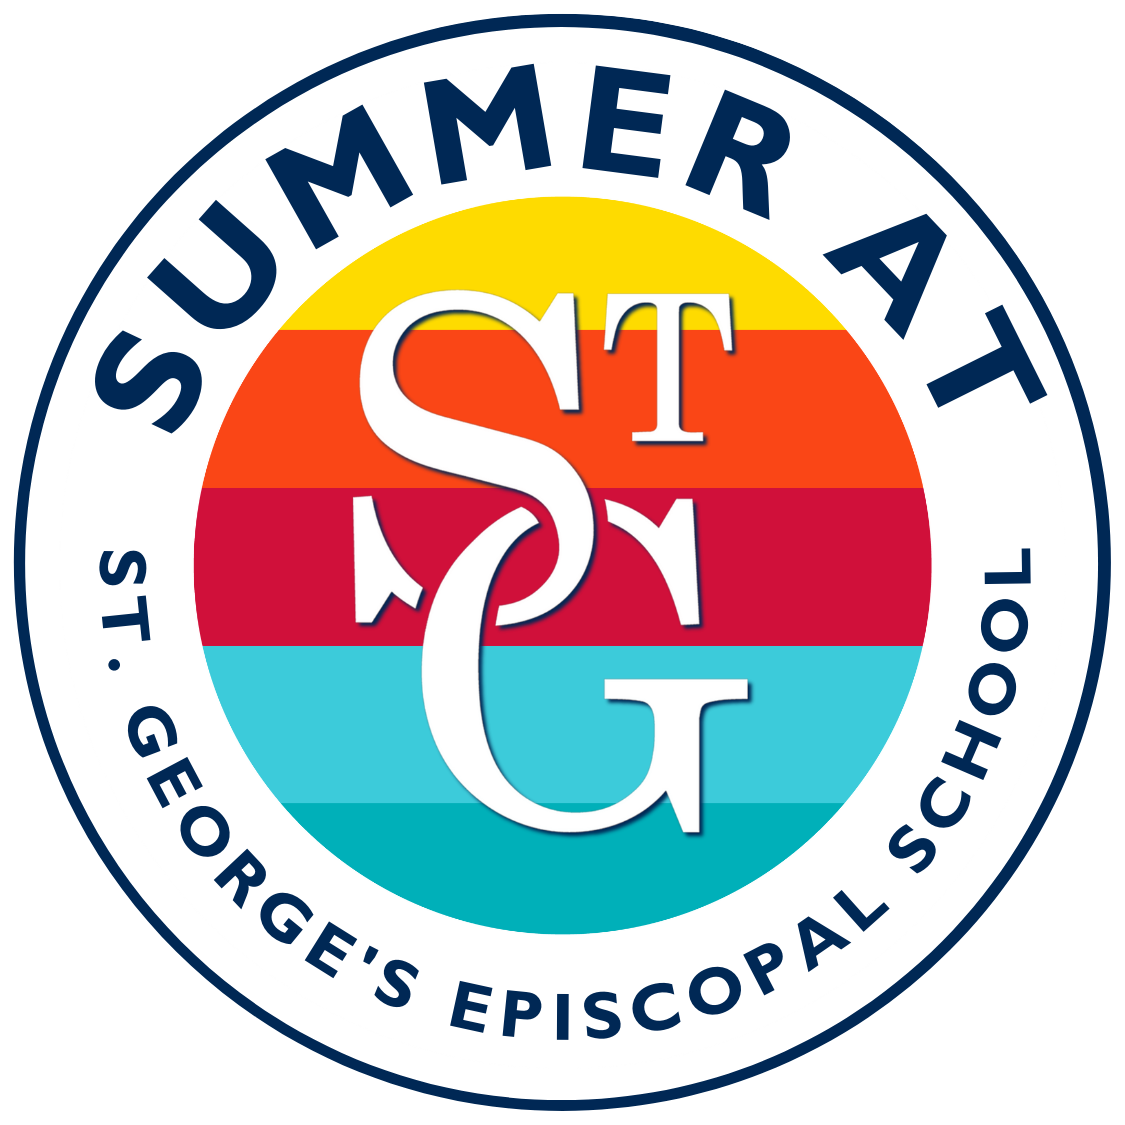 THE SAINT - Summer 2020 by St. George's School - Issuu